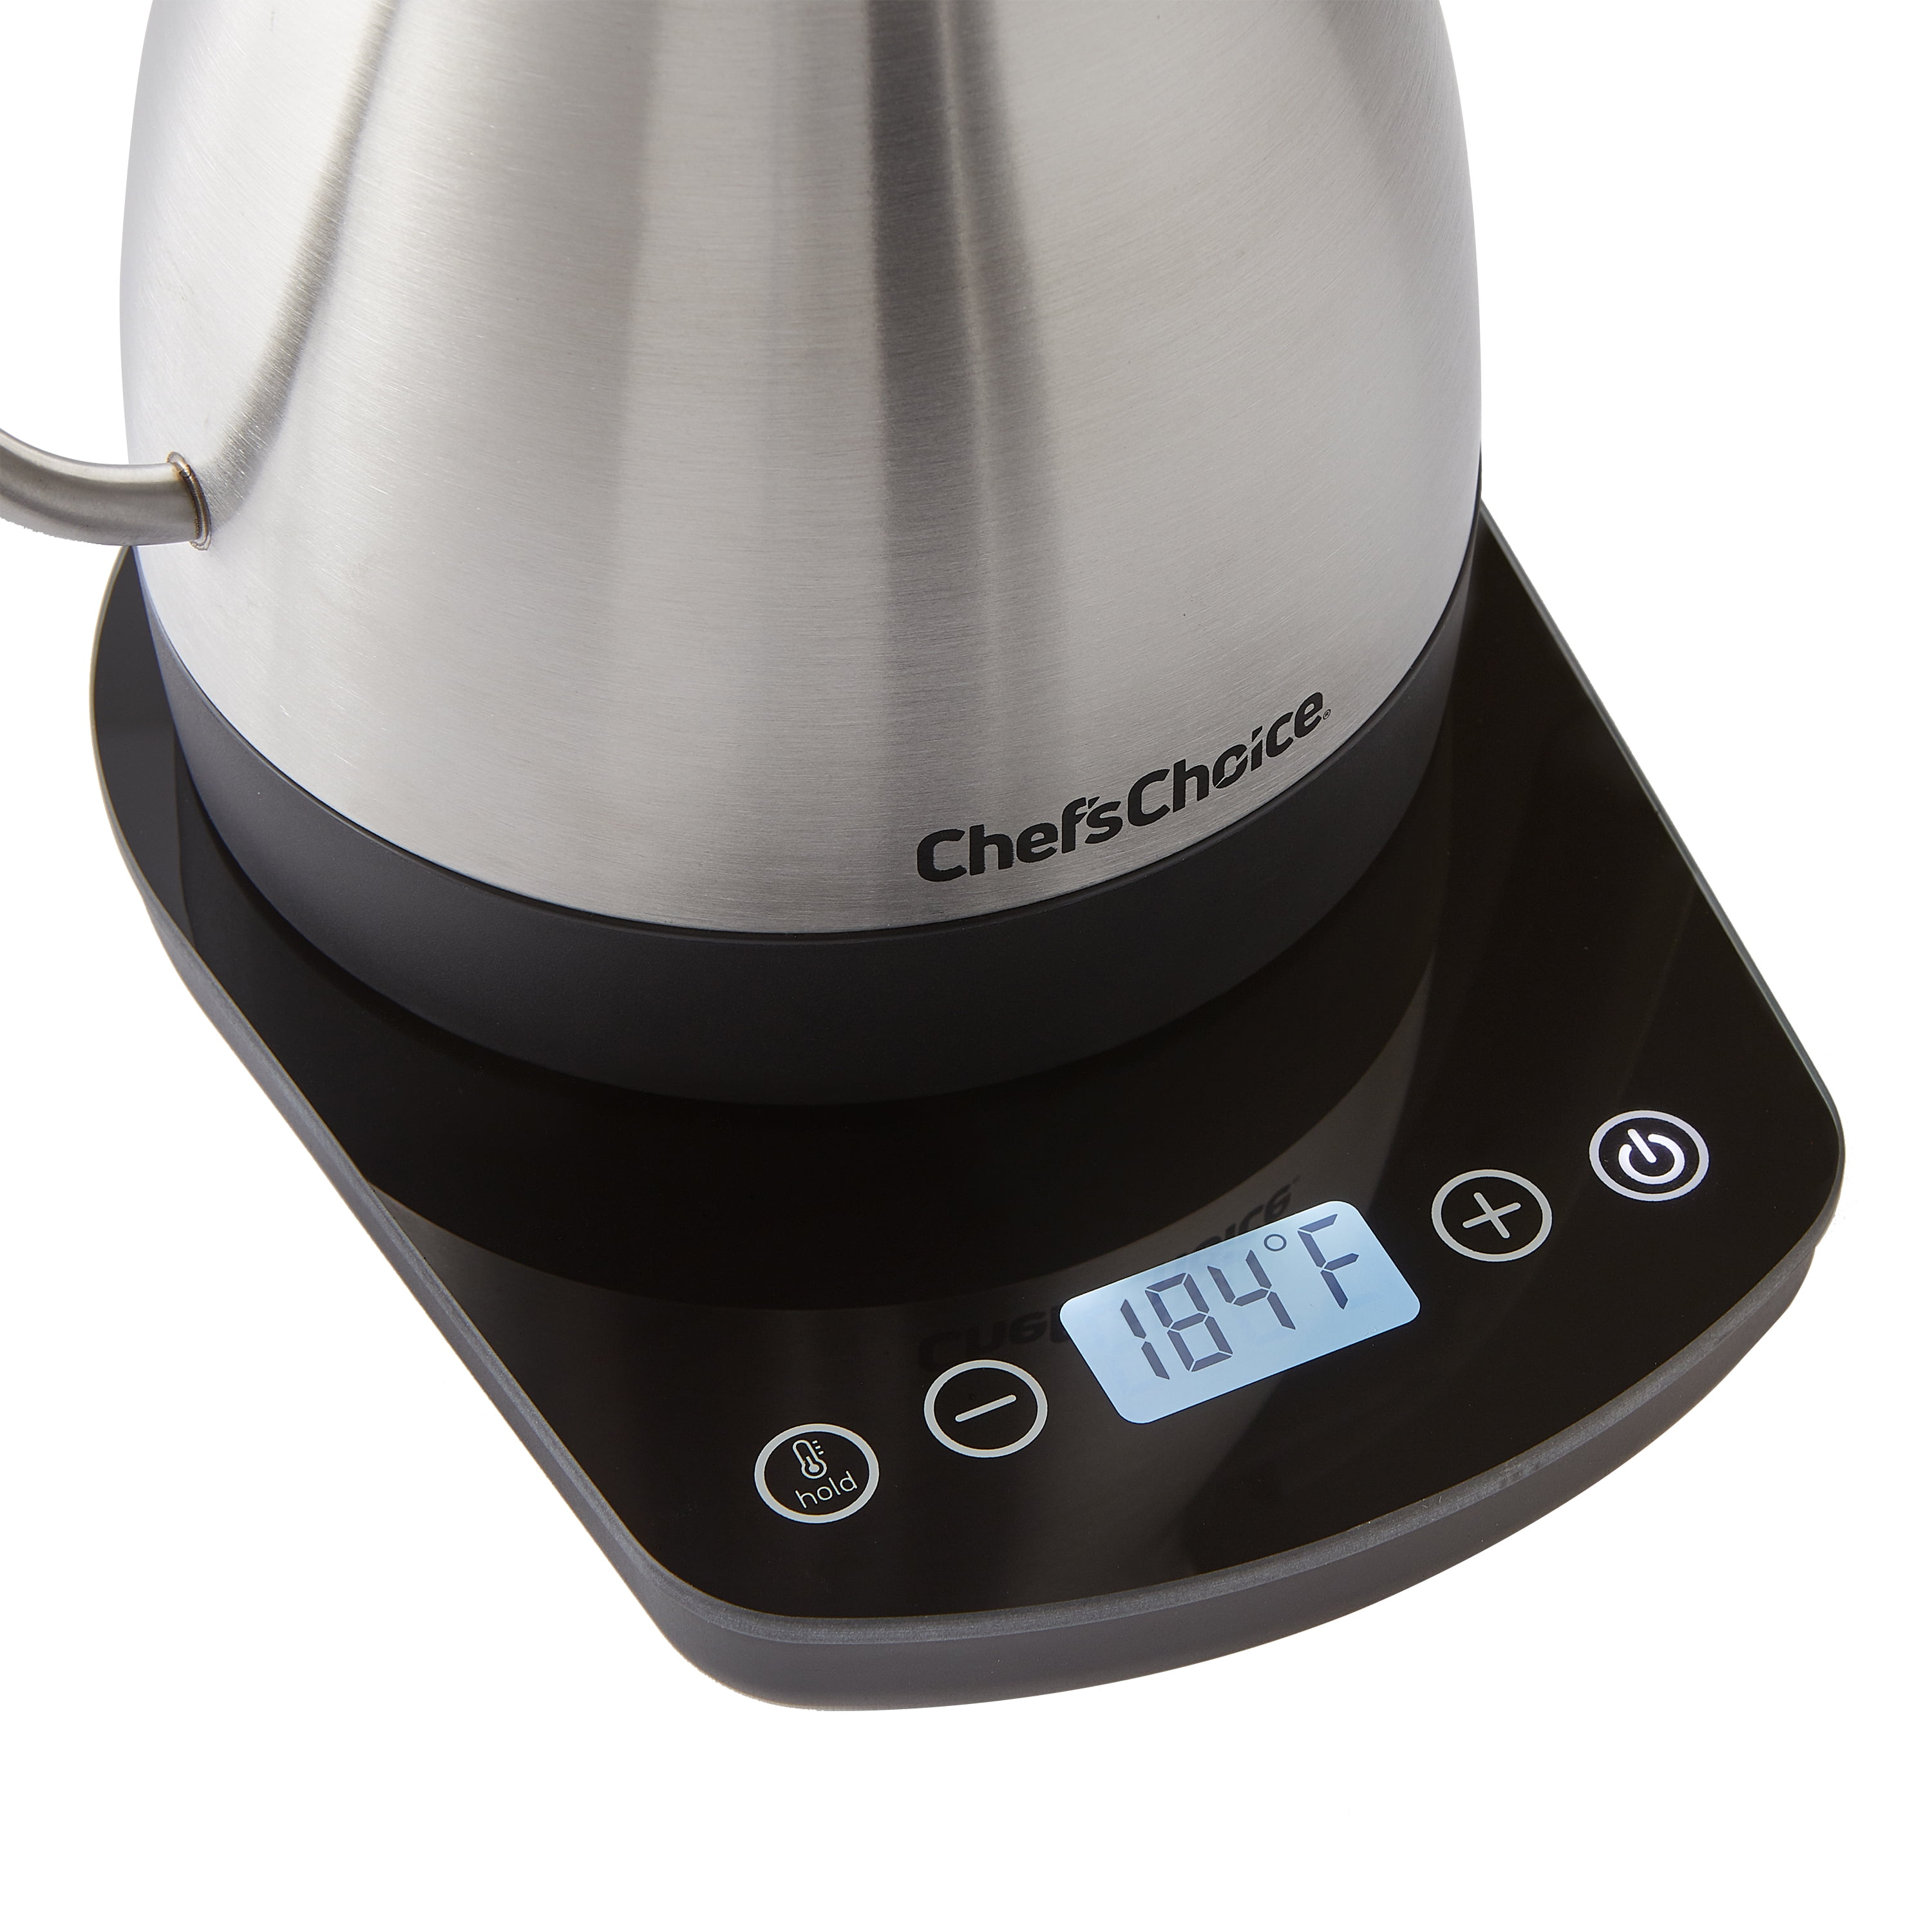 Chef'sChoice 673 Cordless Compact Electric Kettle in Brushed Stainless  Steel Features Boil Dry Protection and Auto Shut Off Easy Pour, 1-Liter,  Silver